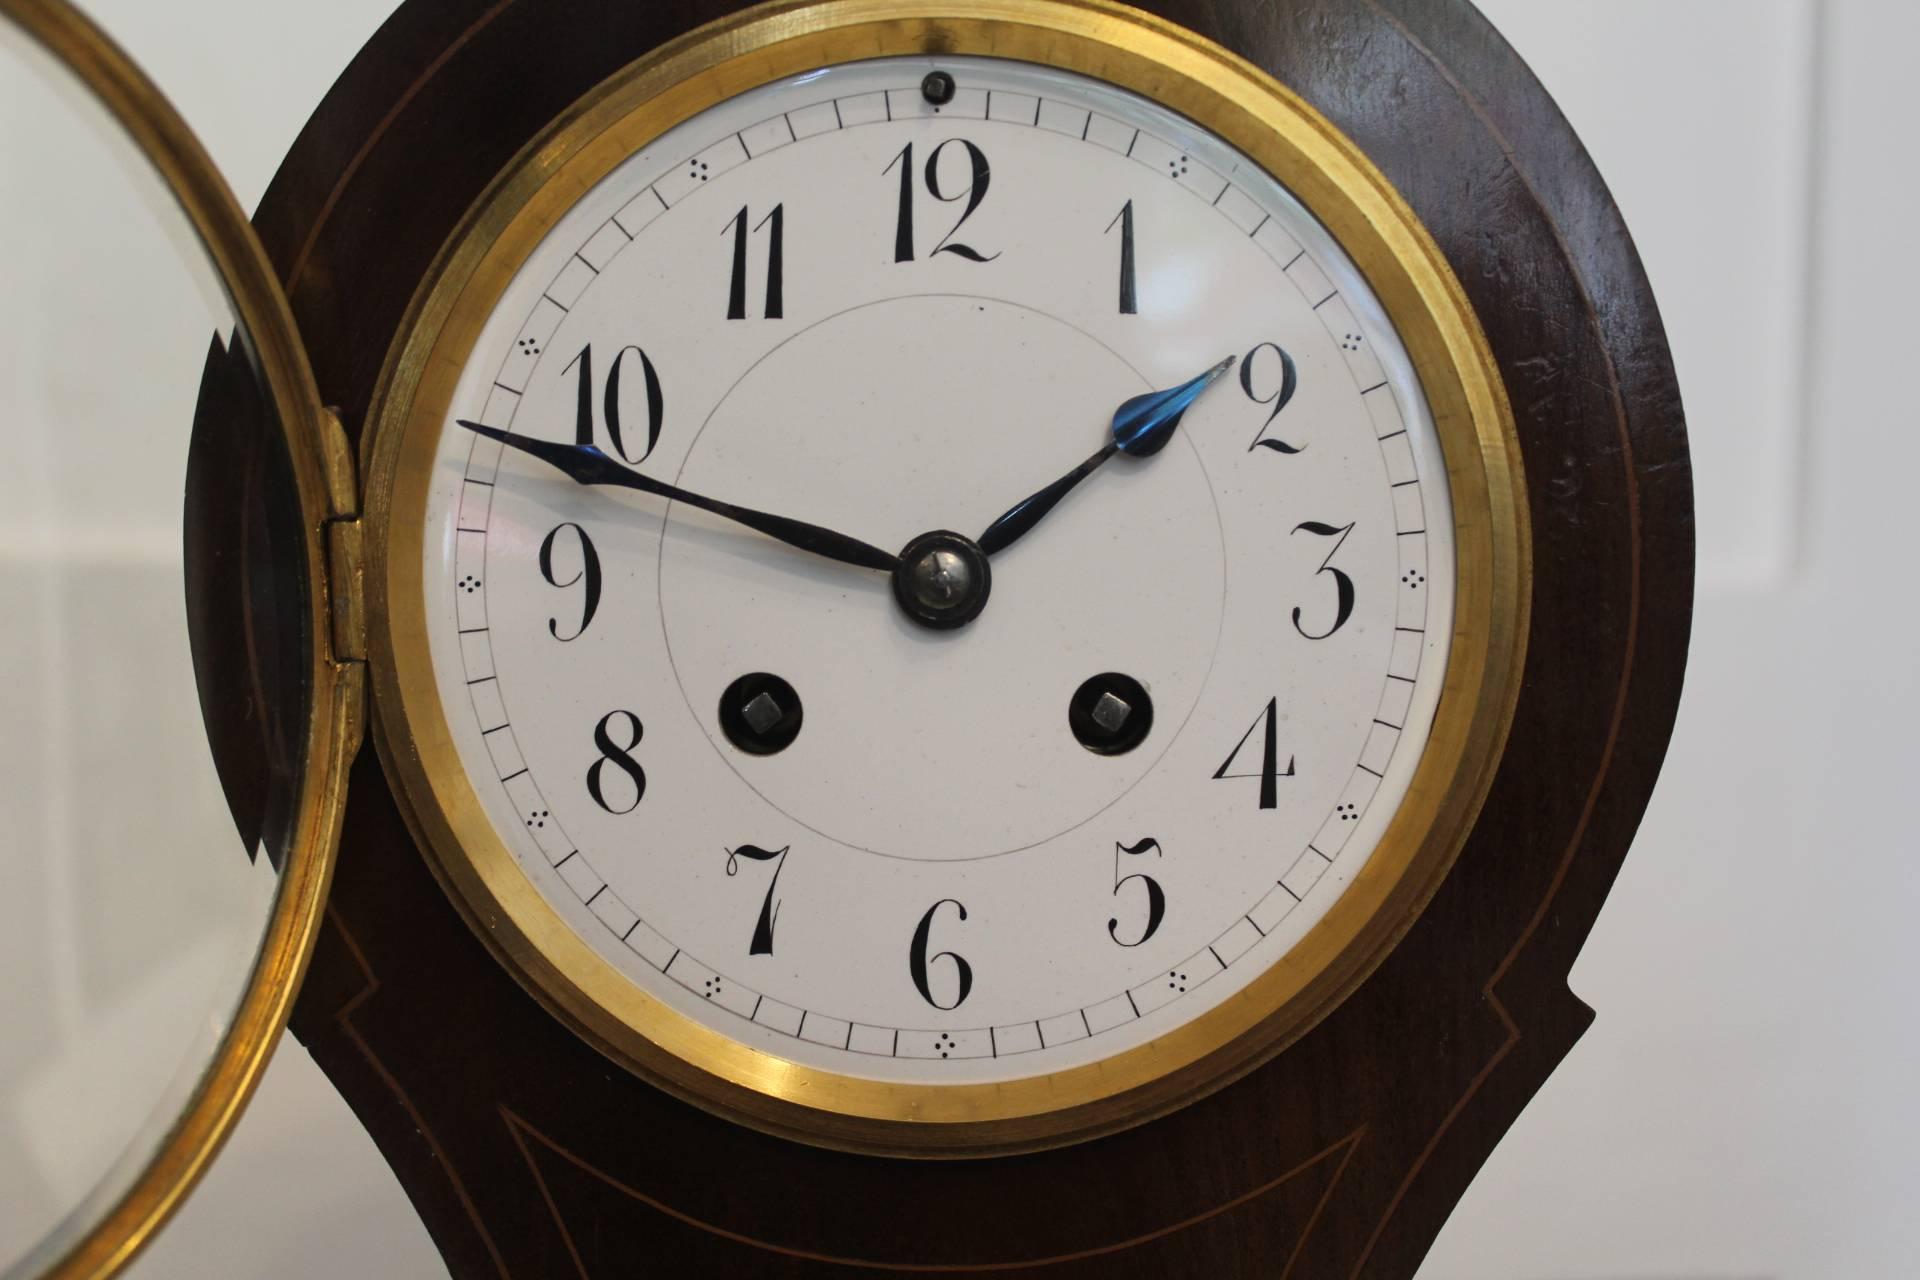 Mahogany balloon mantel clock with satinwood inlay, circa 1900.

This beautiful French clock is in a particularly good mahogany case with decorative satinwood inlay. The crisp white dial showing Arabic numerals and spade hands. It has an